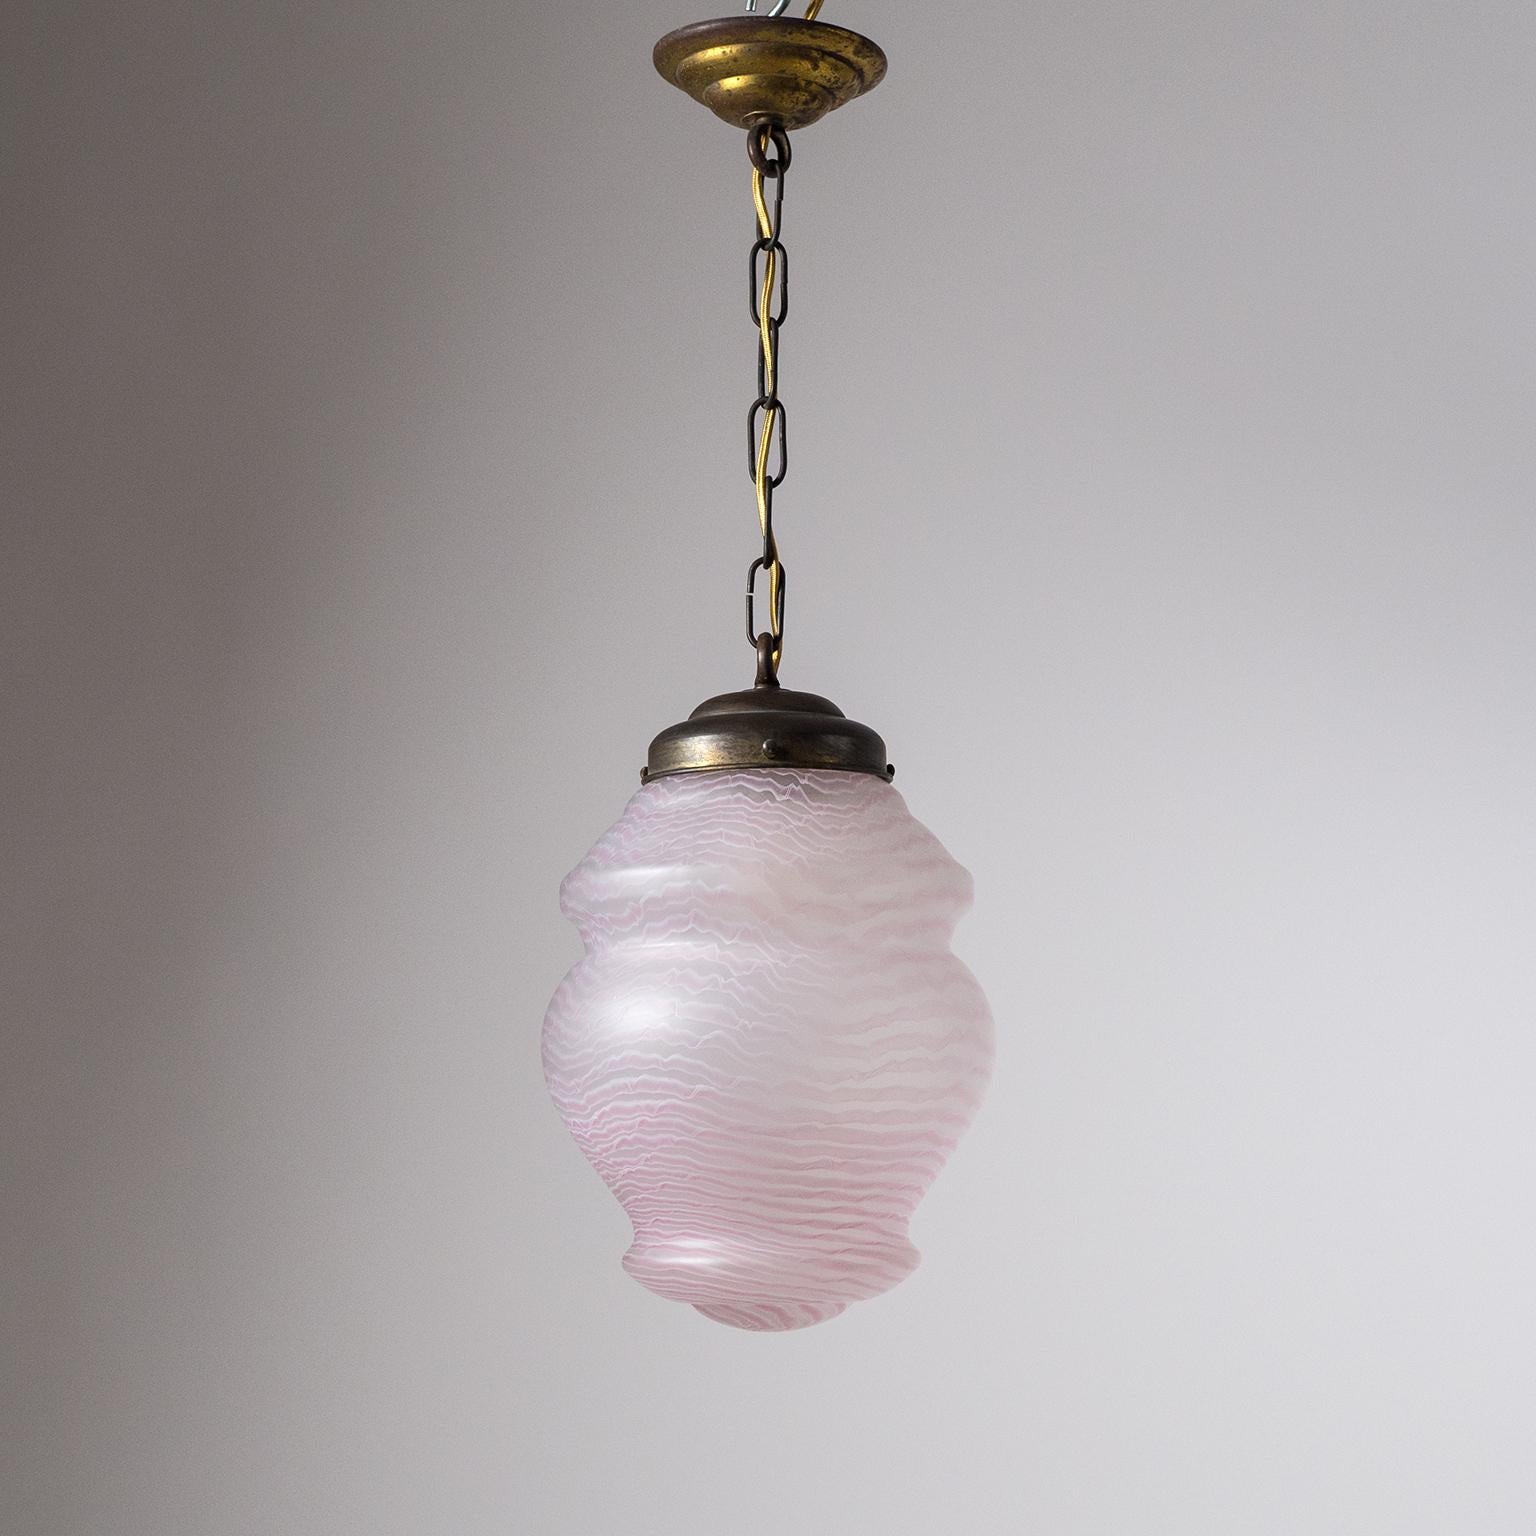 Lovely Art Nouveau/Deco pendant from the early 20th century. Wonderful art glass diffuser with organically Dual-tone striped pattern and a satin finish. Fine original condition with a dark patina on the brass. One original brass E27 socket with new